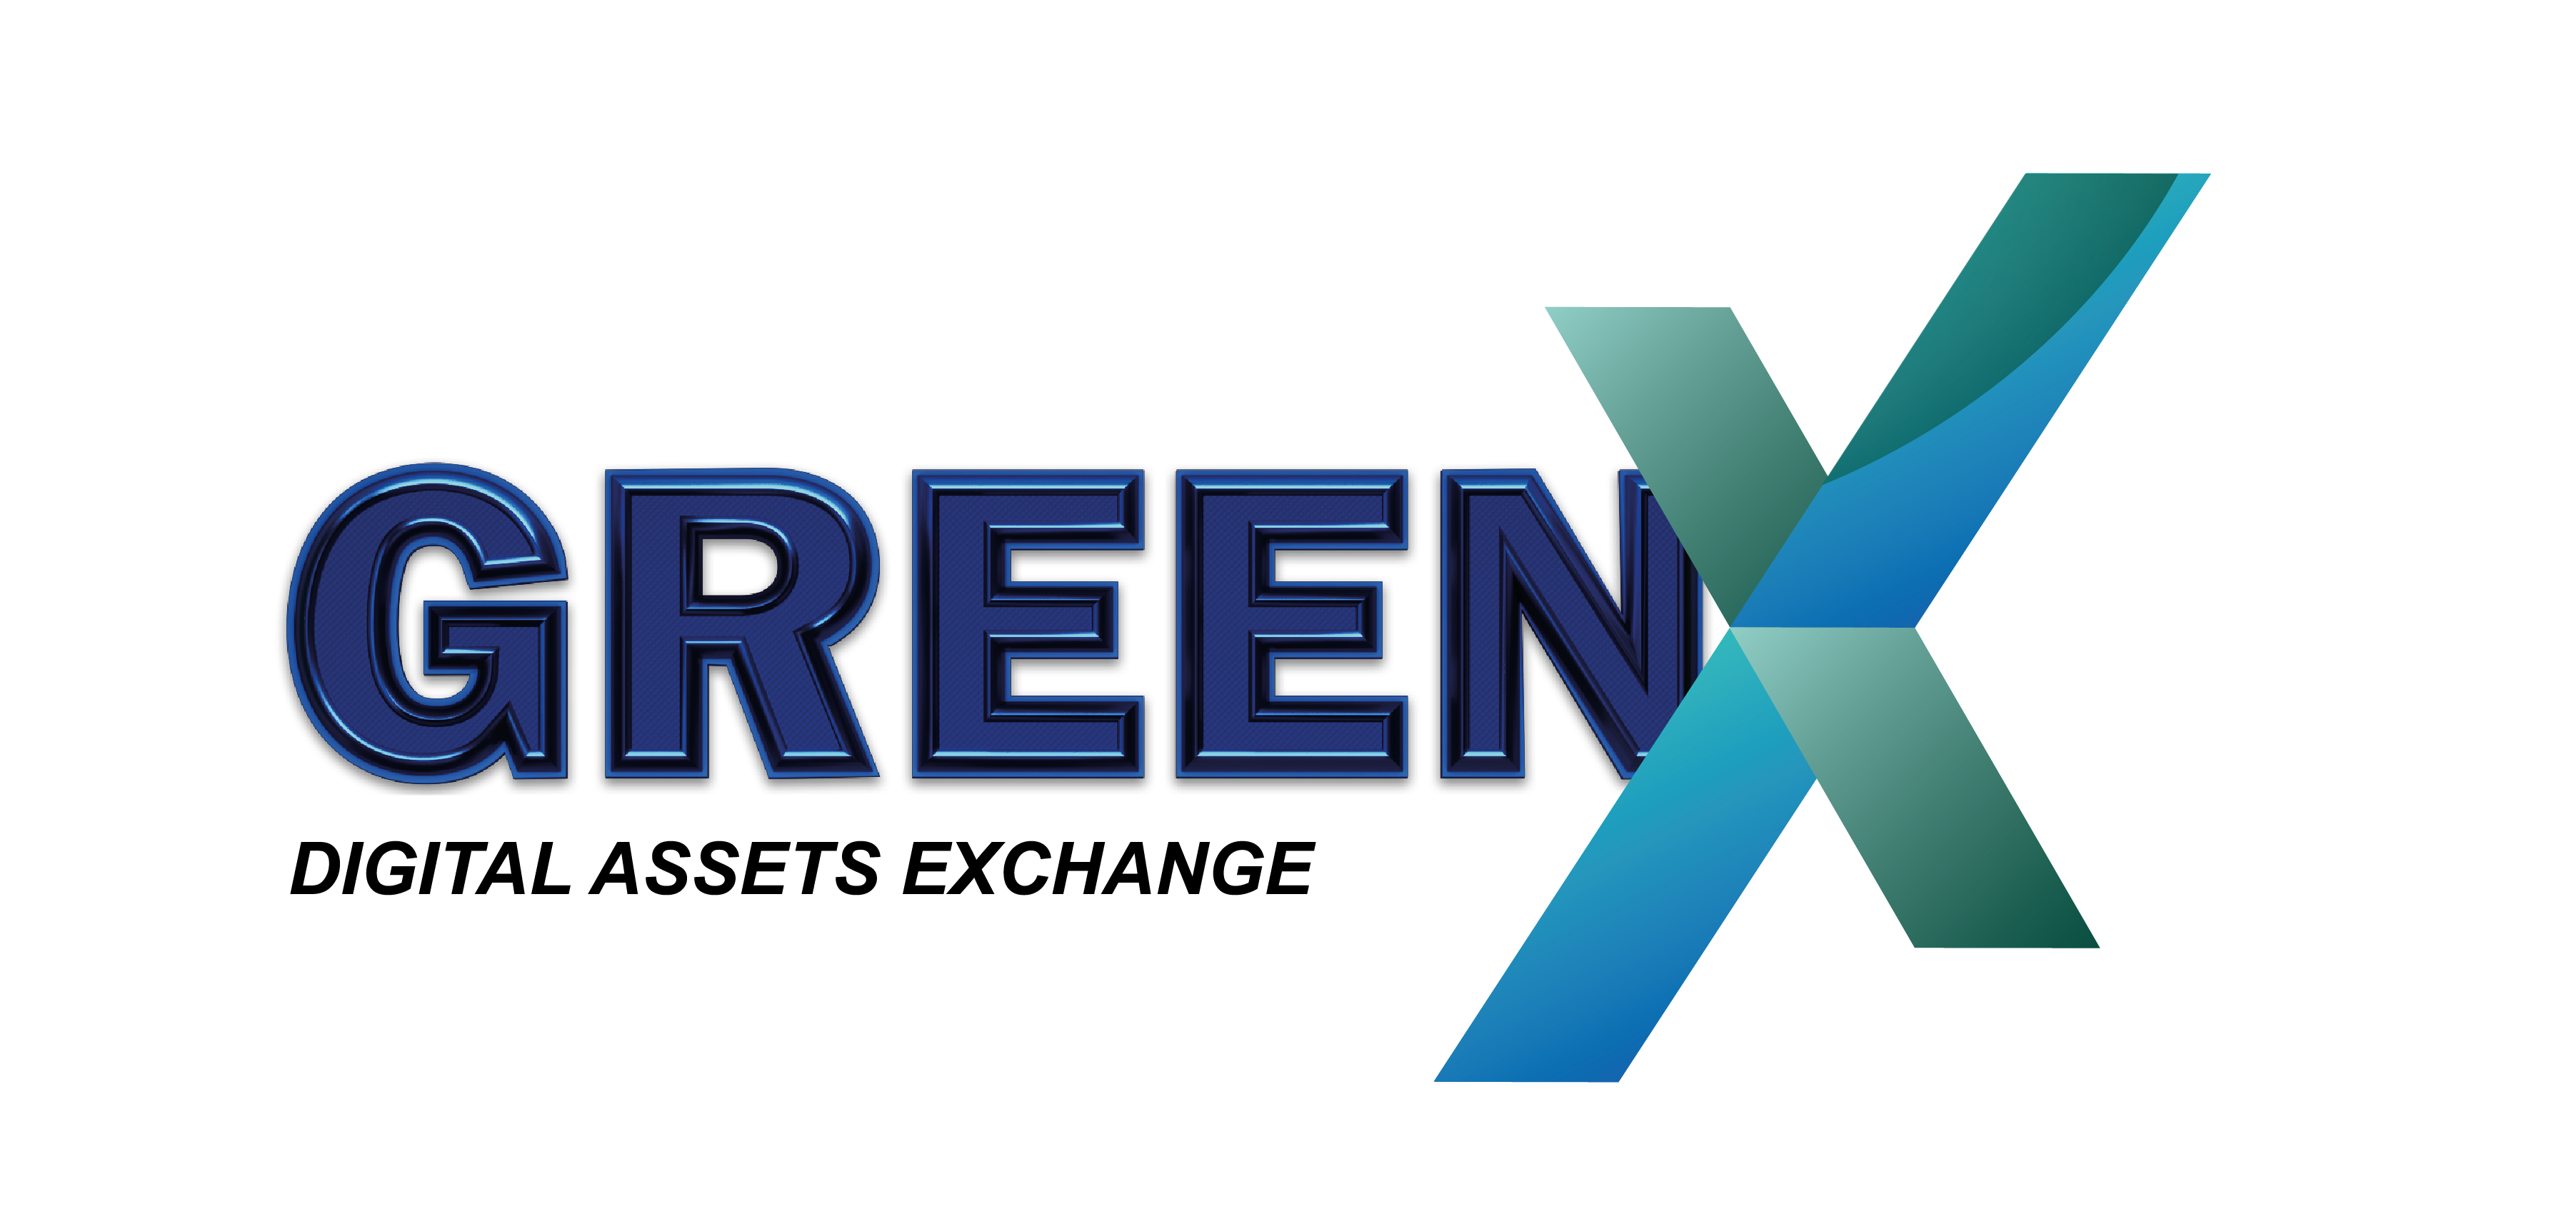 Greenx crypto how crypto price is determined